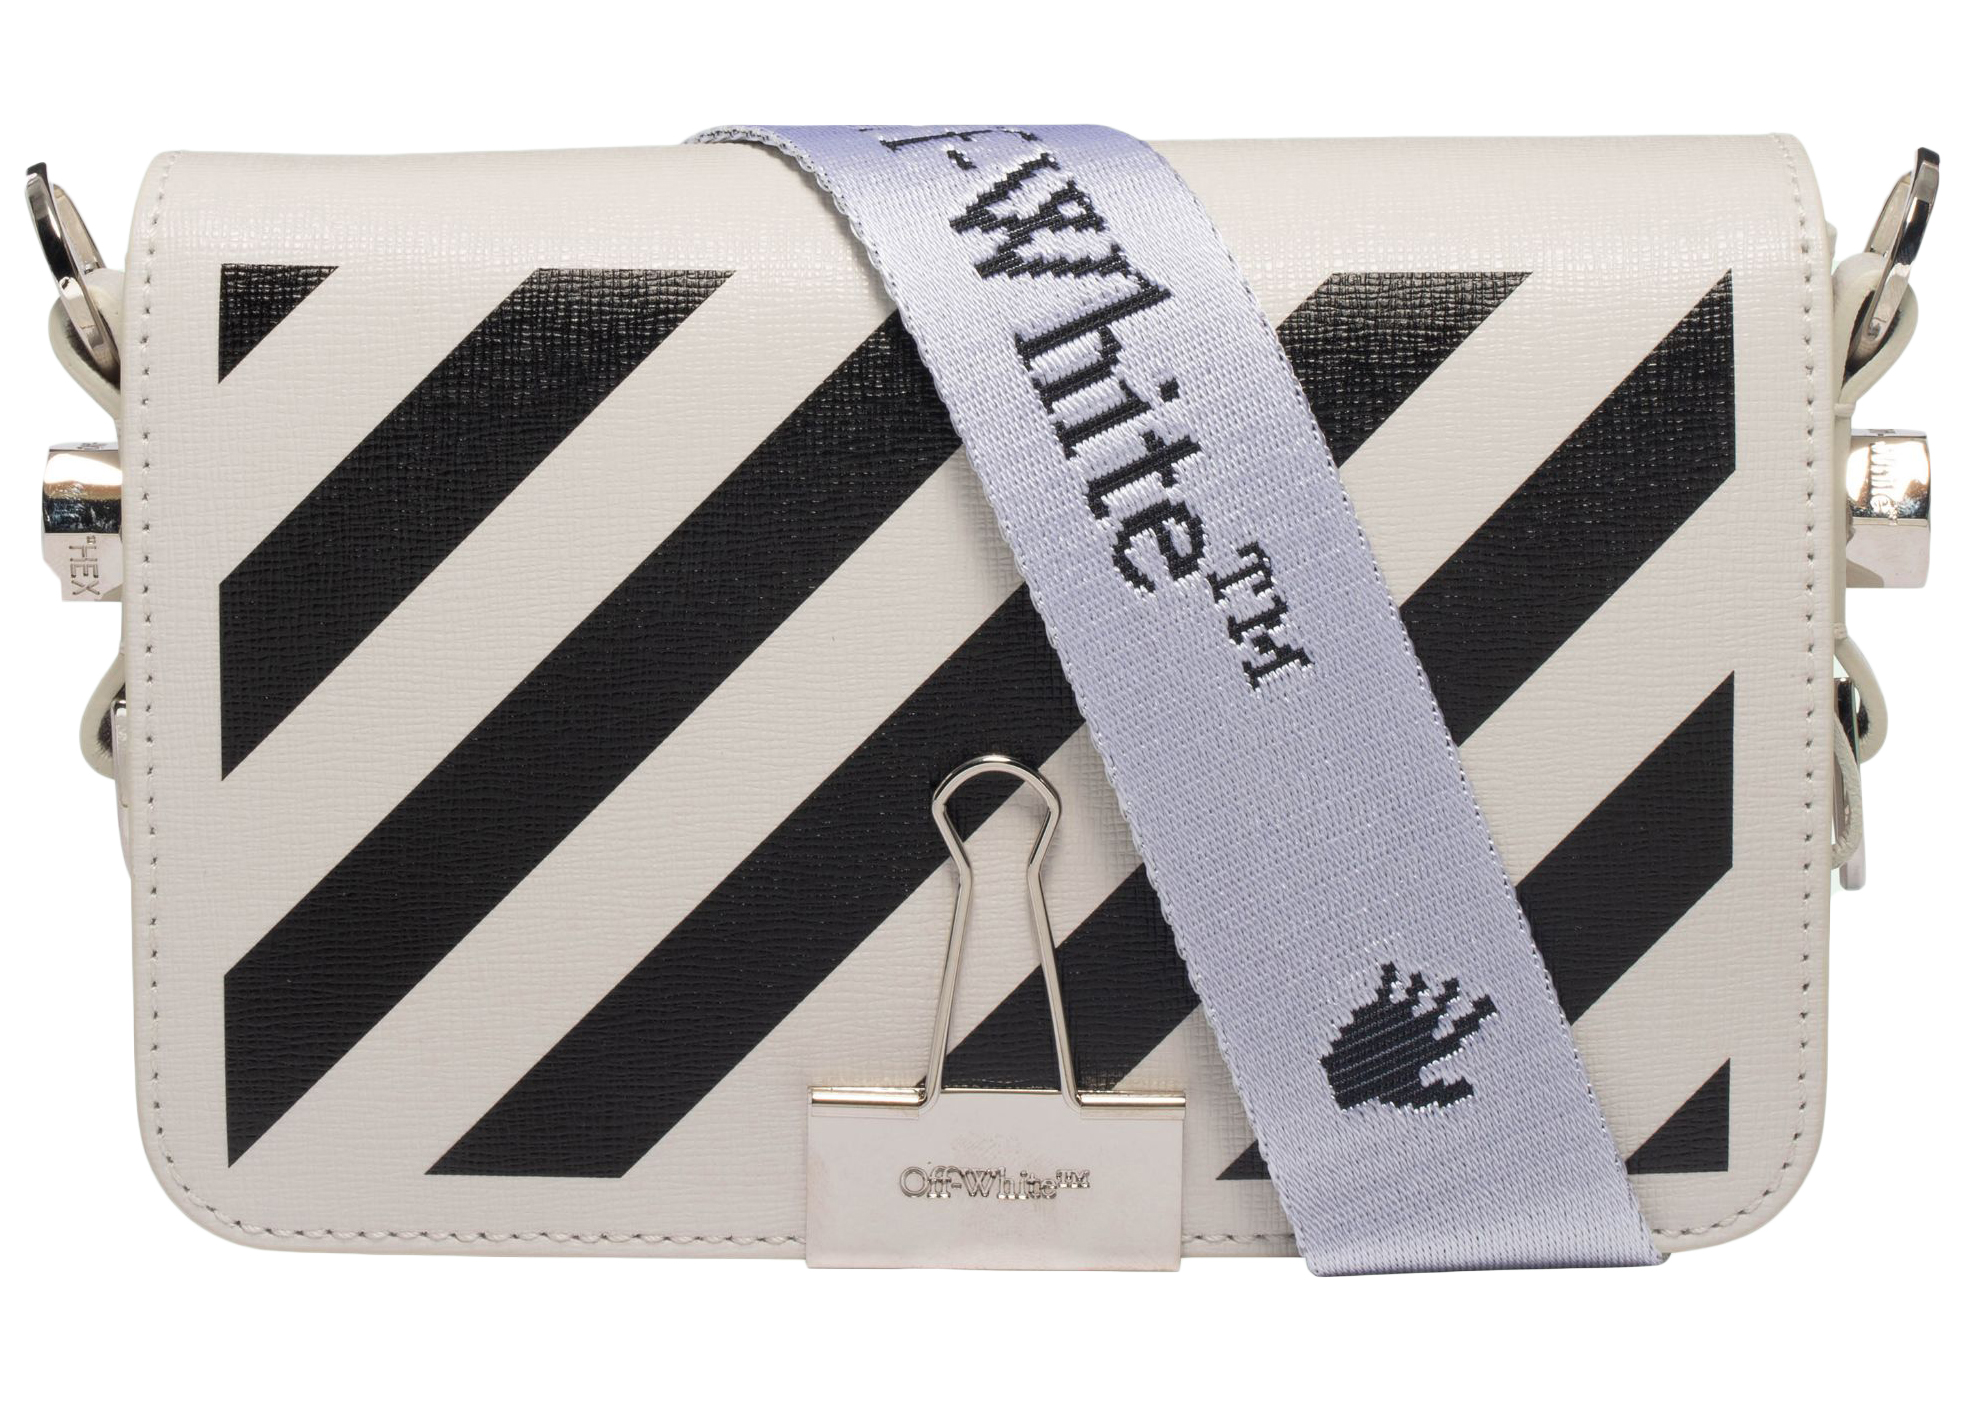 OFF-WHITE Diag Flap Bag Mini White/Black in Leather with Silver